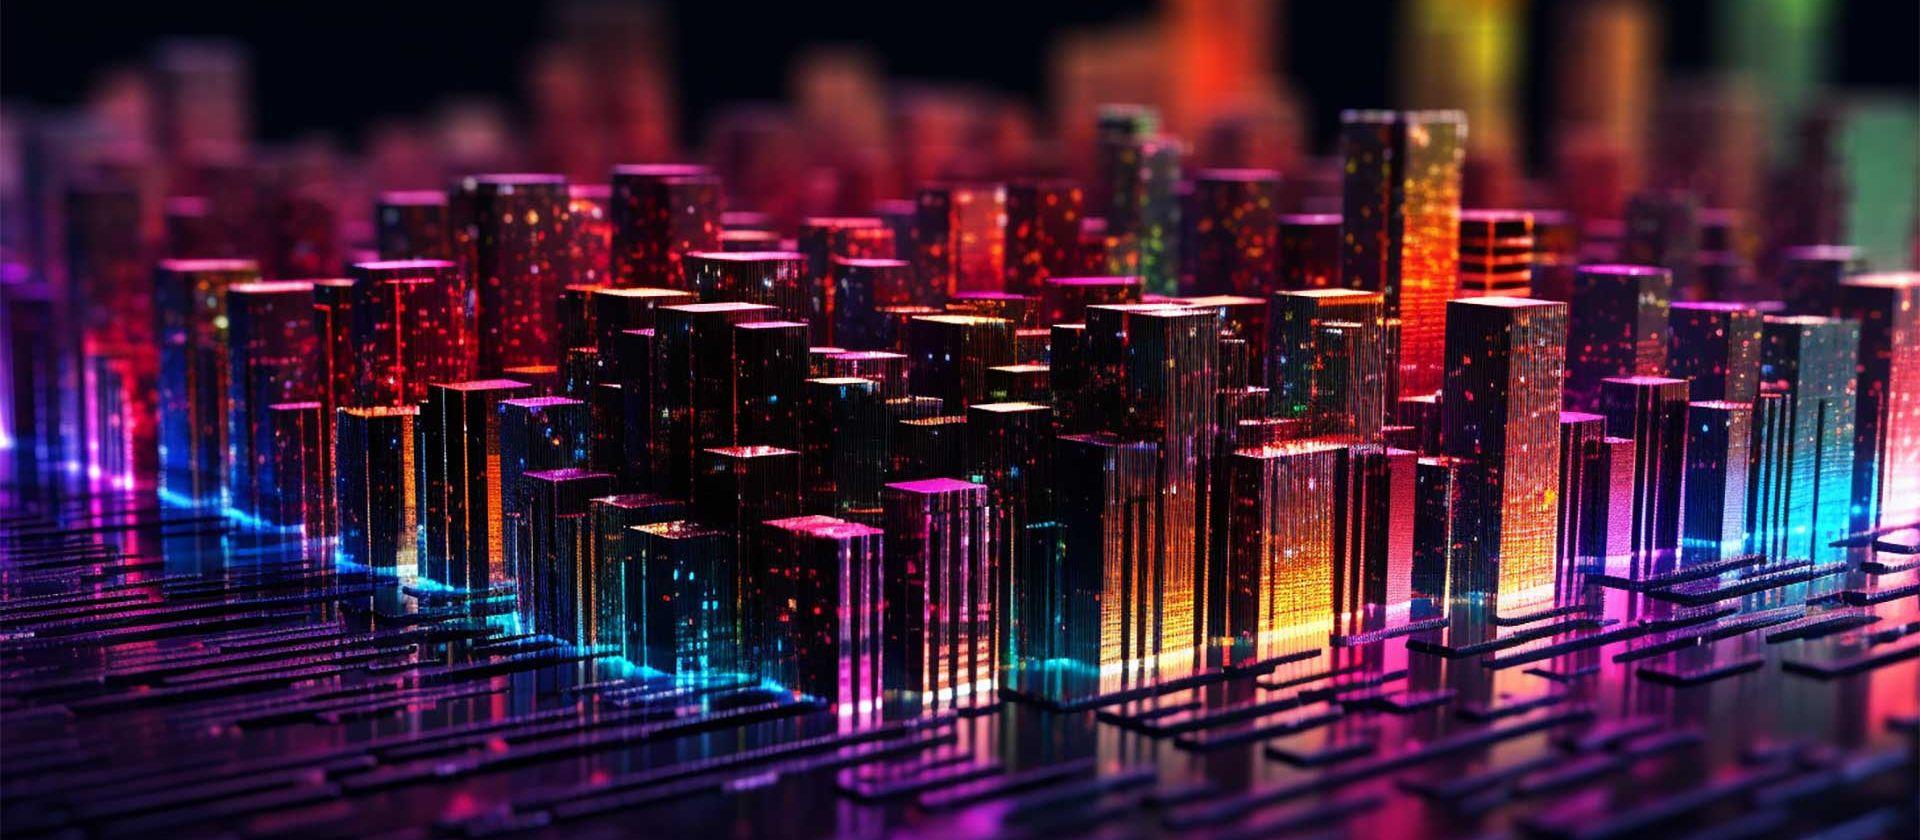 A colourful Illustration concept of a city built on top of a silicone chip